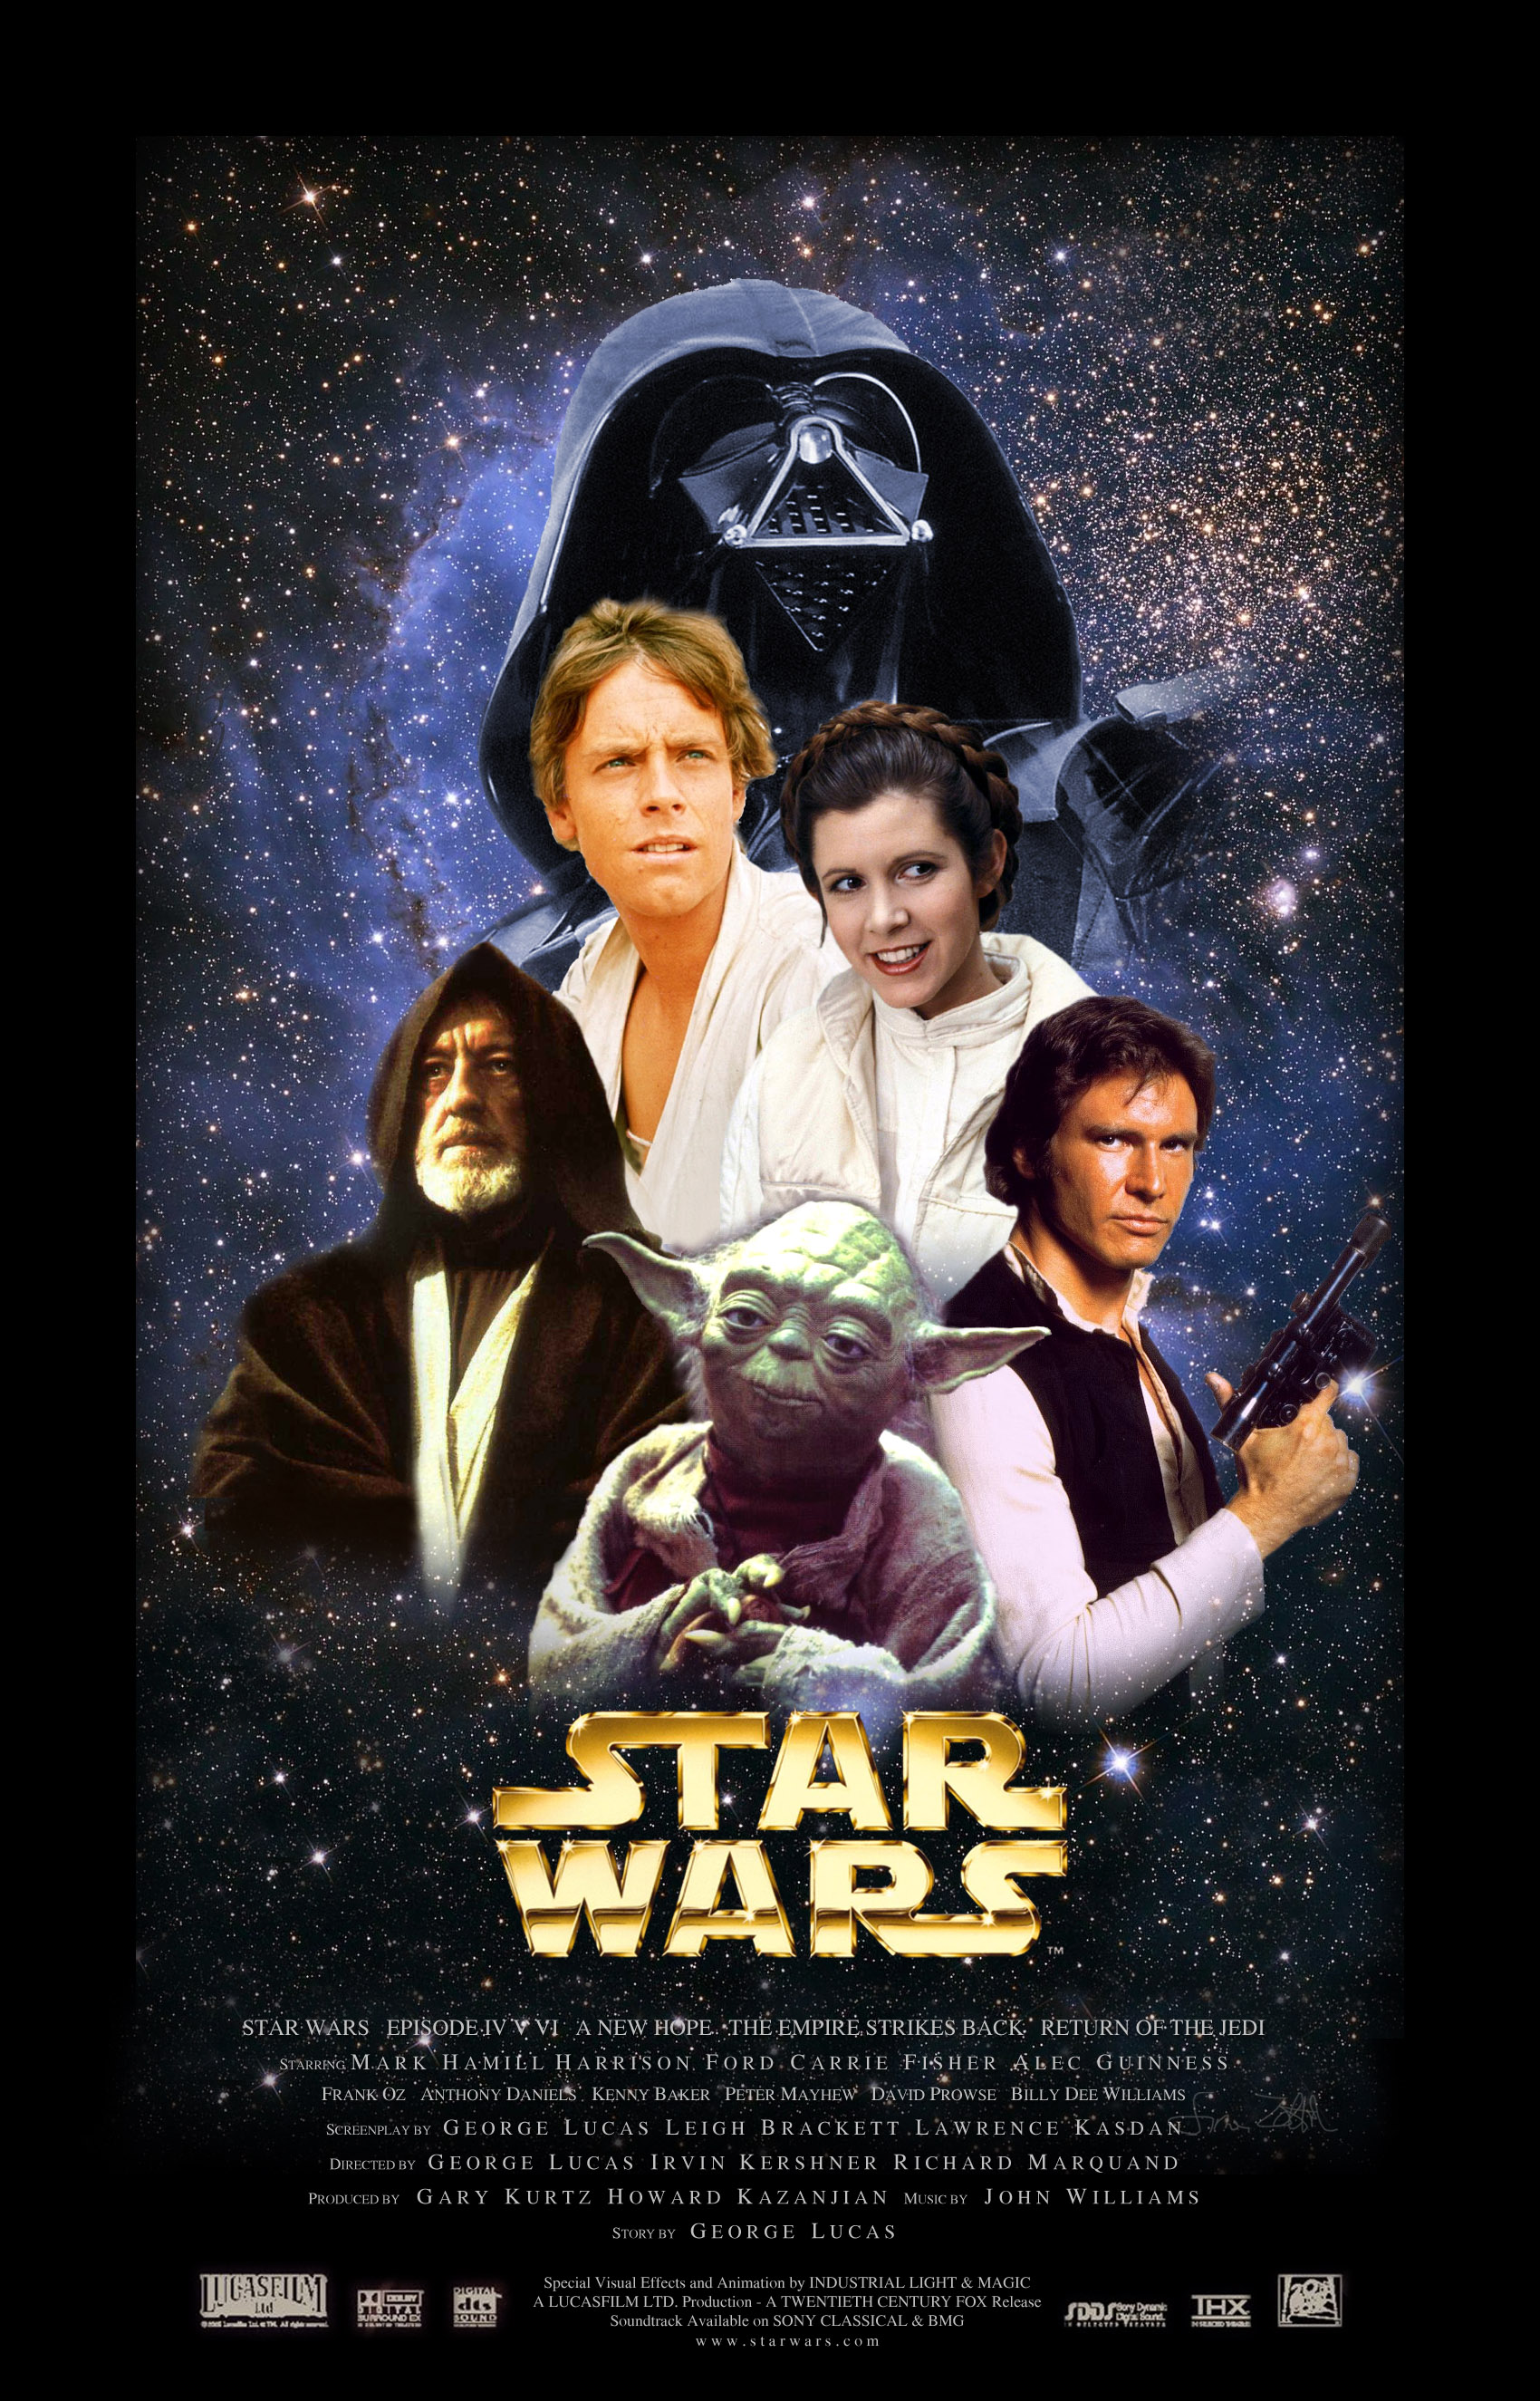 episode iii revenge of the sith posters two trilogy posters 1700x2650